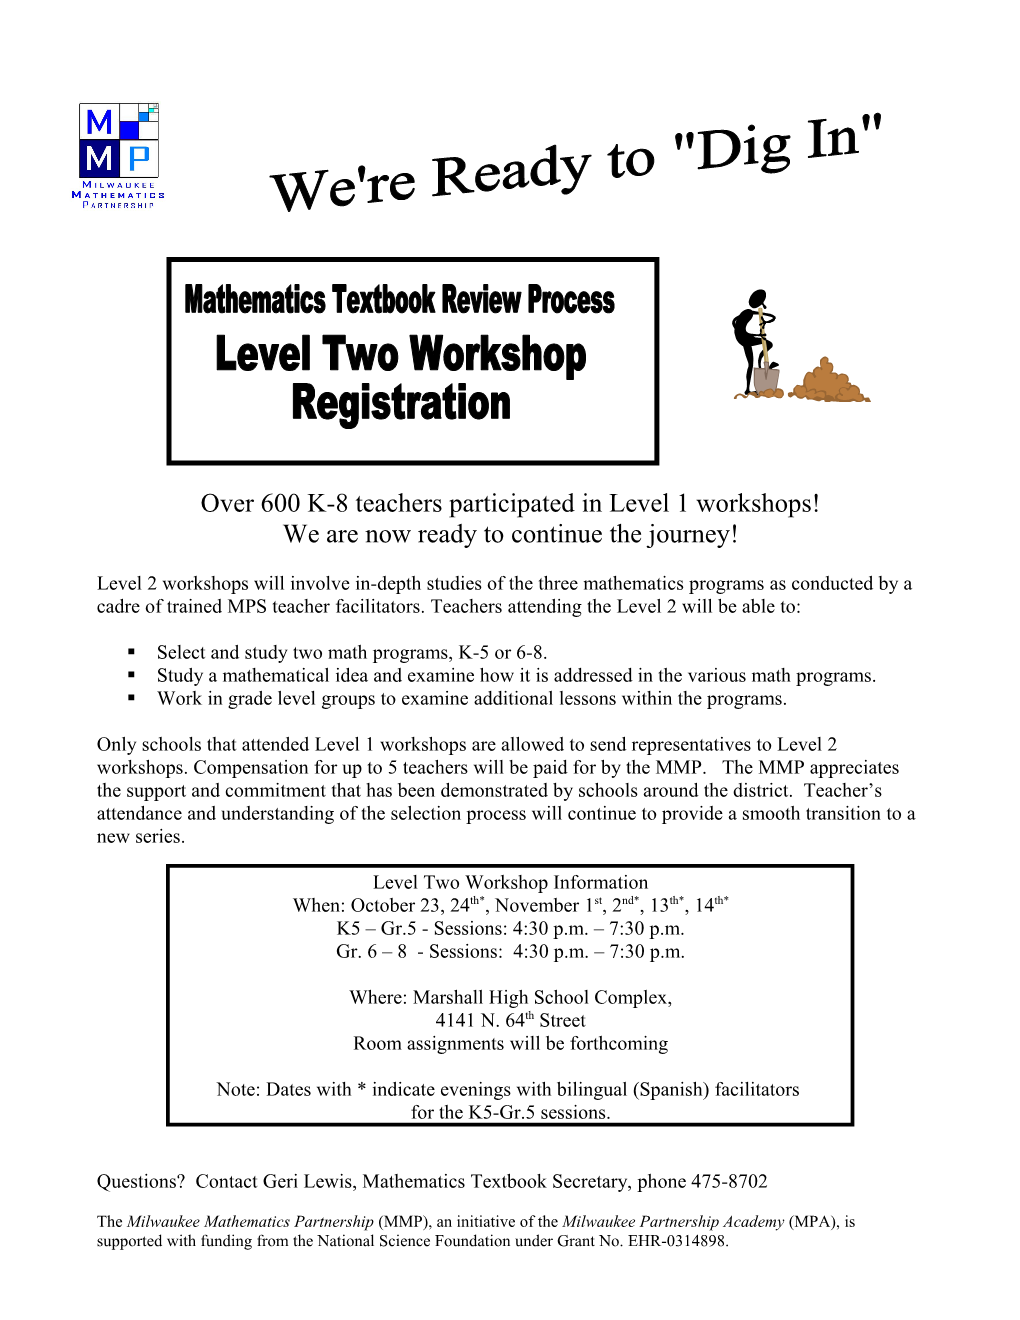 Over 600 K-8 Teachers Participated in Level 1 Workshops!